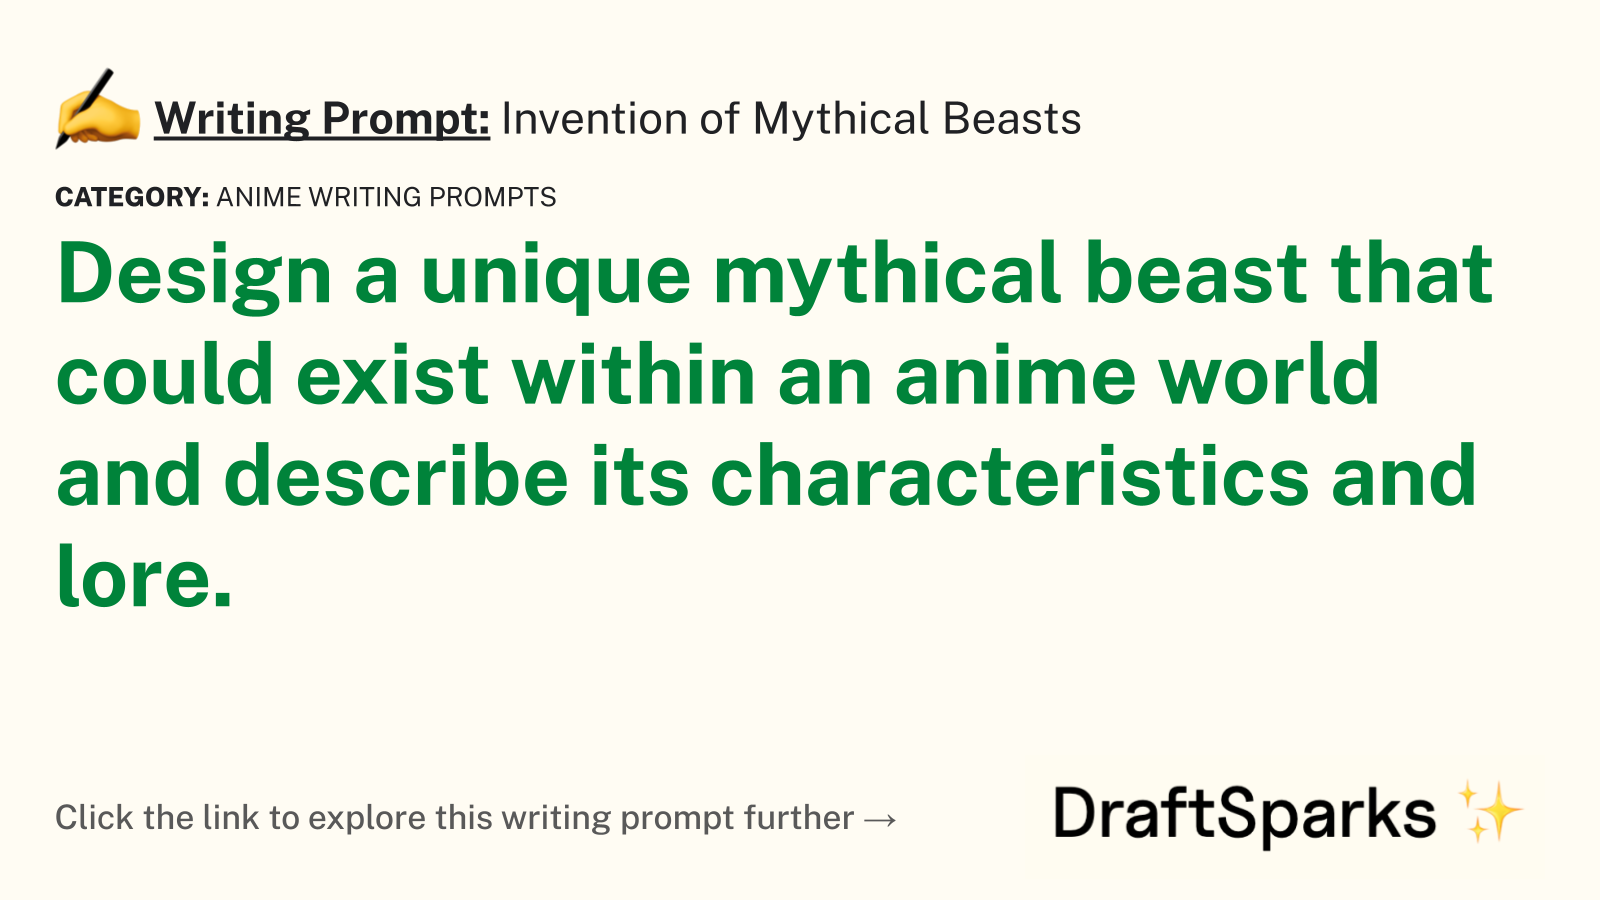 Invention of Mythical Beasts